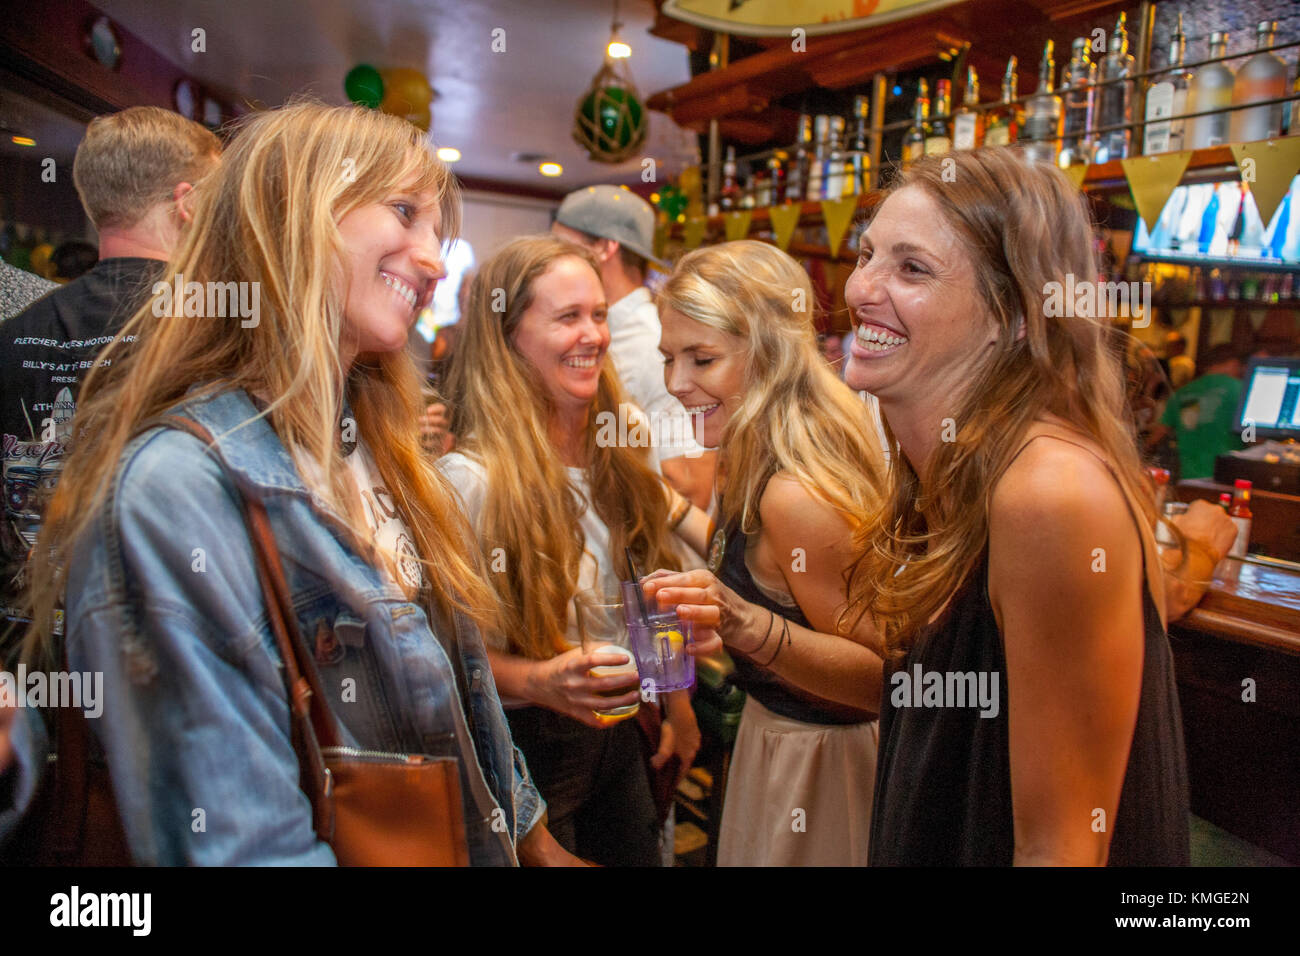 Enjoying their beer, four young adult women dance to recorded music in a Newport Beach, CA, Irish bar. Stock Photo